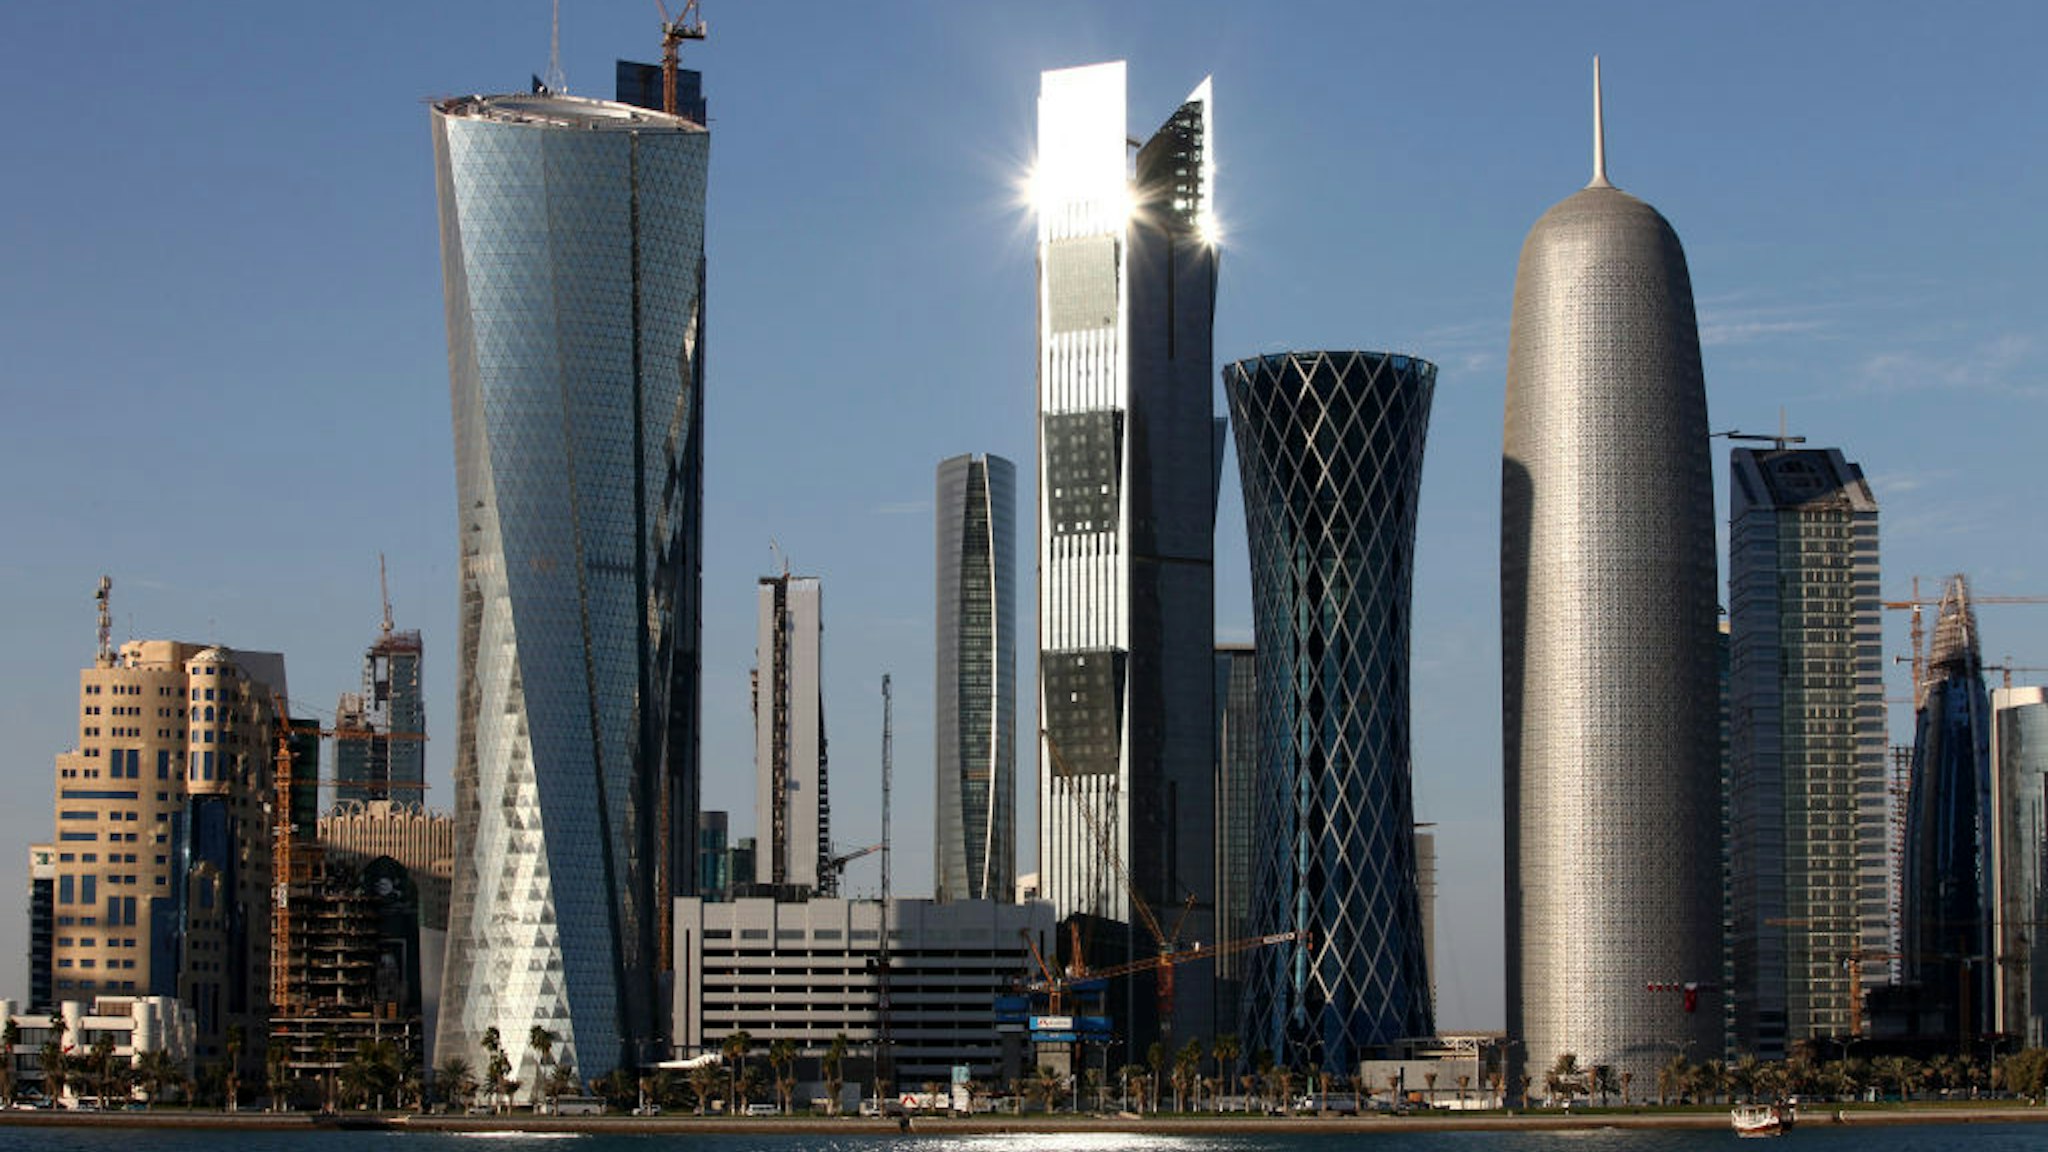 DOHA, QATAR - DECEMBER 30: New high-rise office buildings and hotels, some of them still under construction, stand in the West Bay and Oneiza district near City Center mall and build the skyline at the opposite of the promenade at the Al Corniche road on December 30, 2010 in Doha, Qatar. The International Monetary Fund (IMF) recently reiterated its projection for the Qatari economy with predictions of double digit growth for 2010 and 2011. Though natural gas and petroleum production are still the biggest two single sources of income, the non-energy sector overtook oil and gas in Qatari GDP for 2009. The FIFA world cup 2022 will takes place in Qatar.